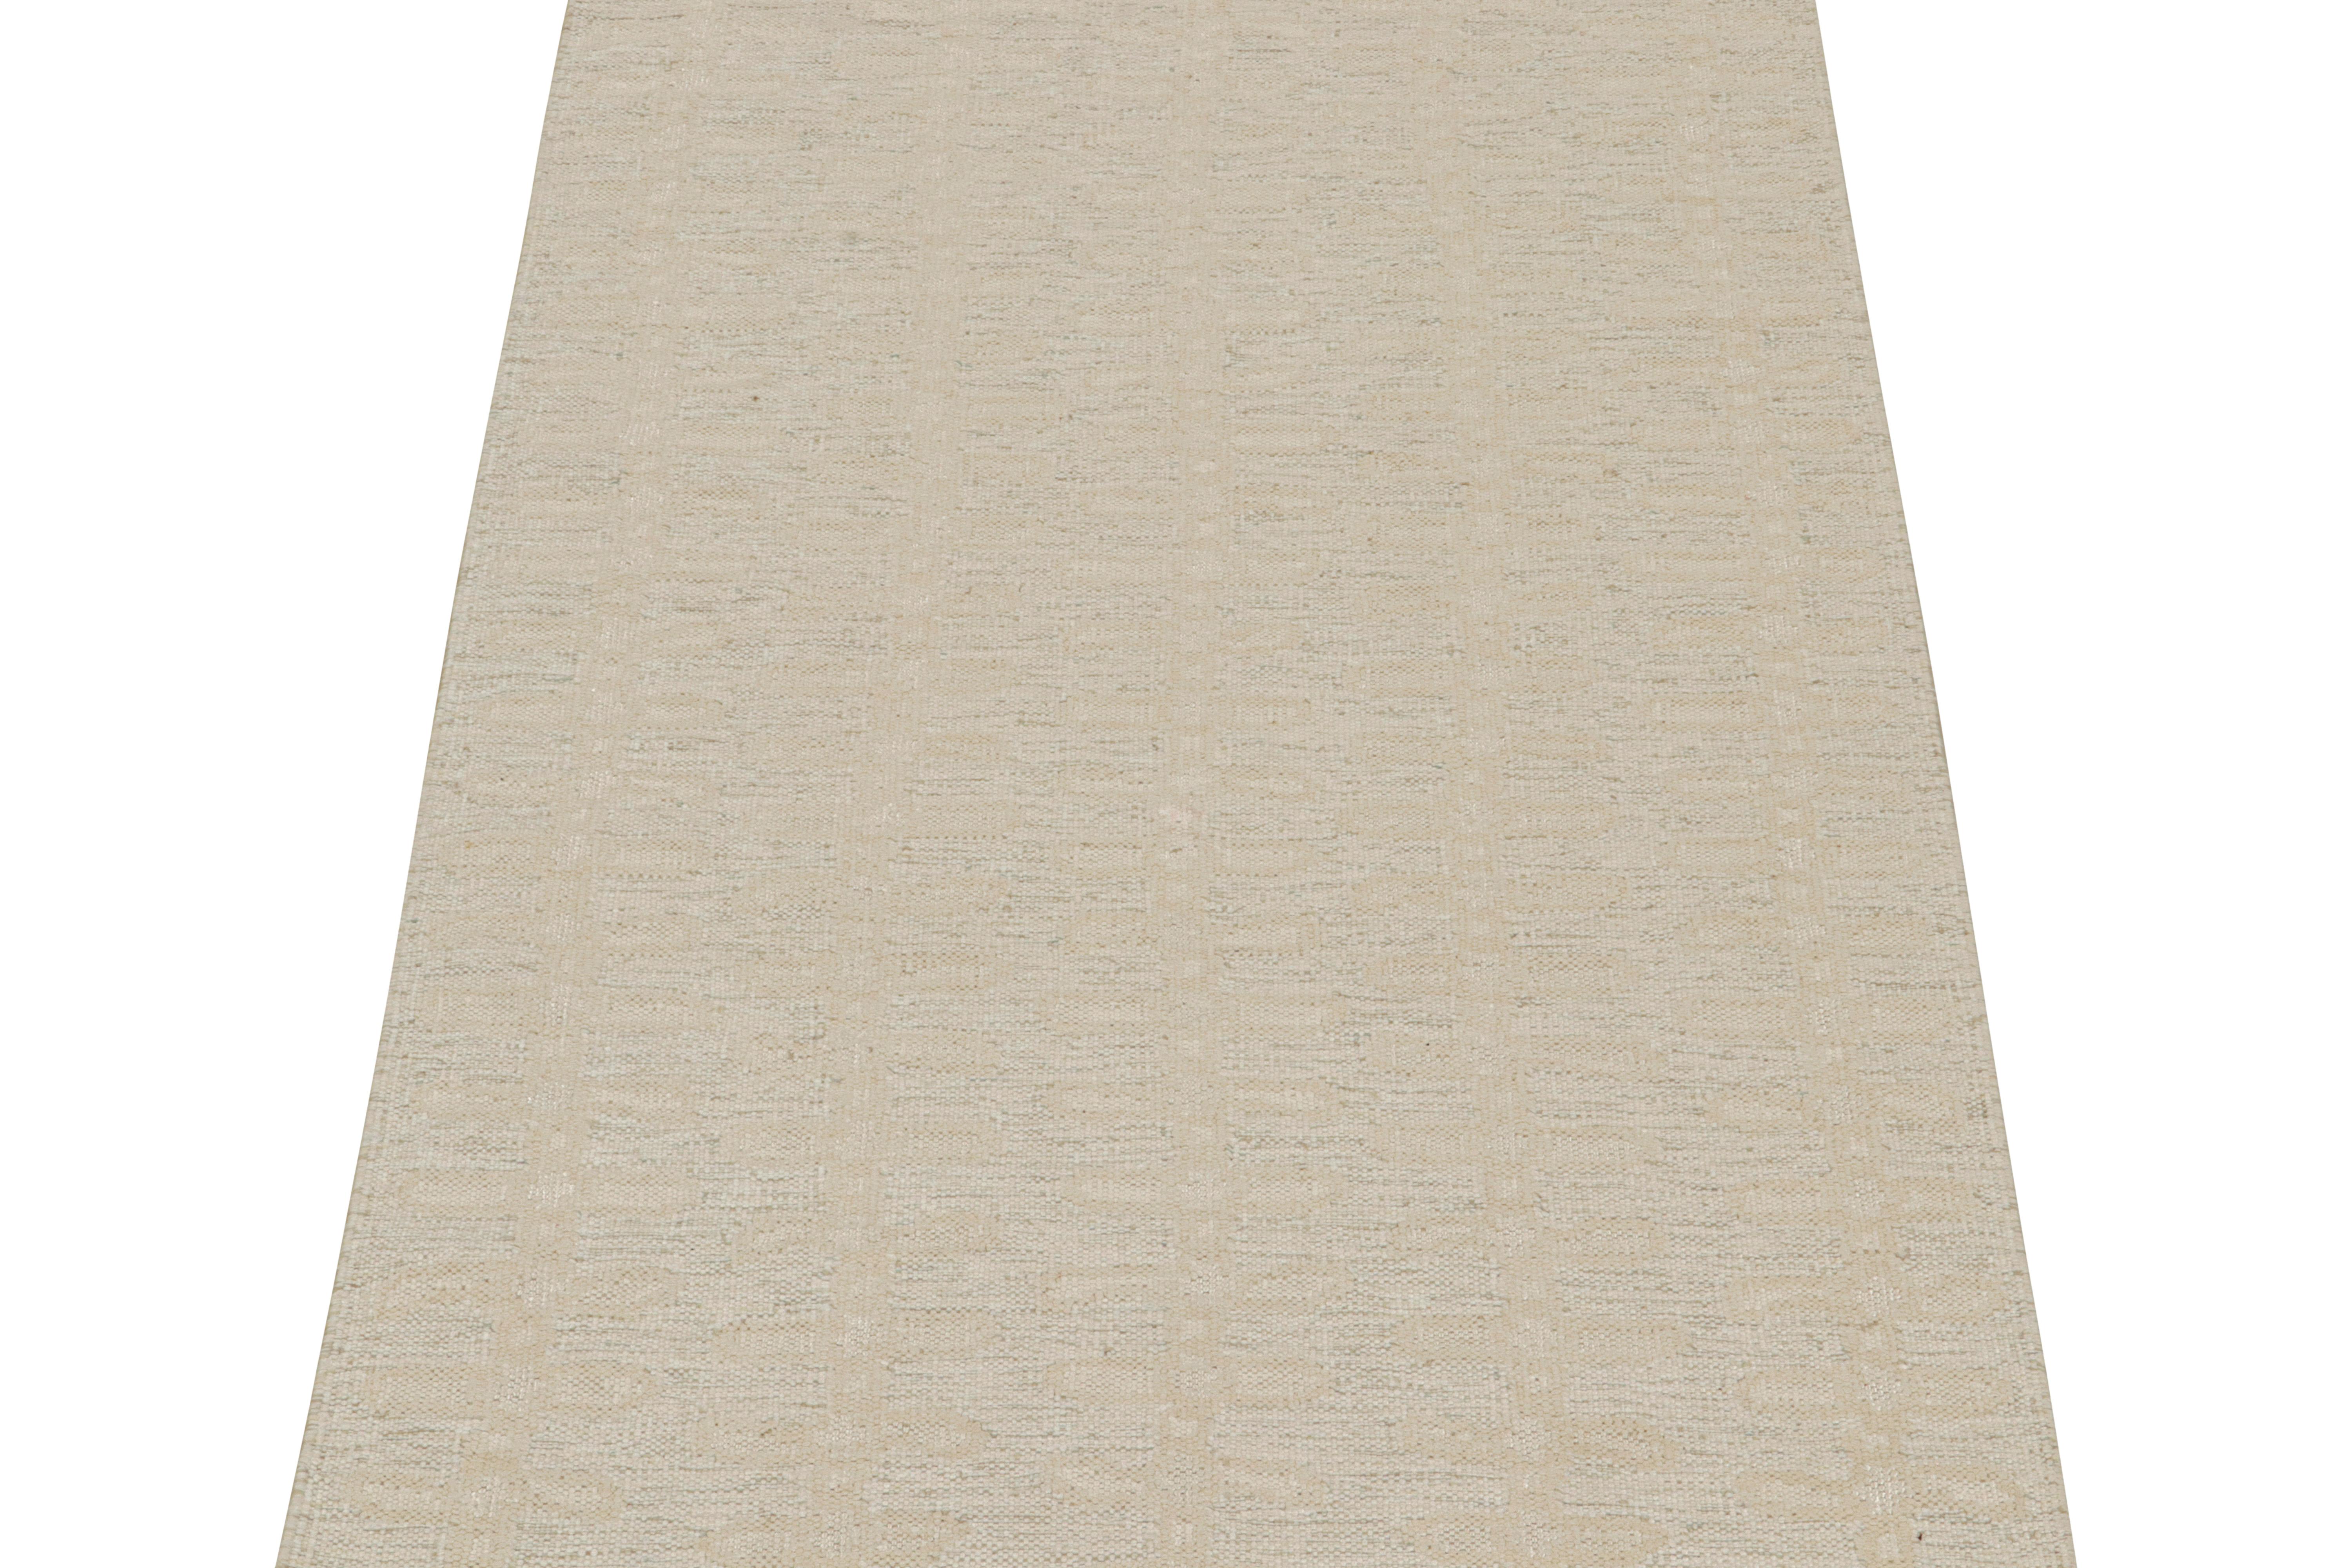 This 5x7 Kilim is a bold new addition to the Scandinavian Collection by Rug & Kilim. Handwoven in wool and natural yarns, its design reflects a contemporary take on mid-century Rollakans and Swedish Deco style.

On the design:

This new flat